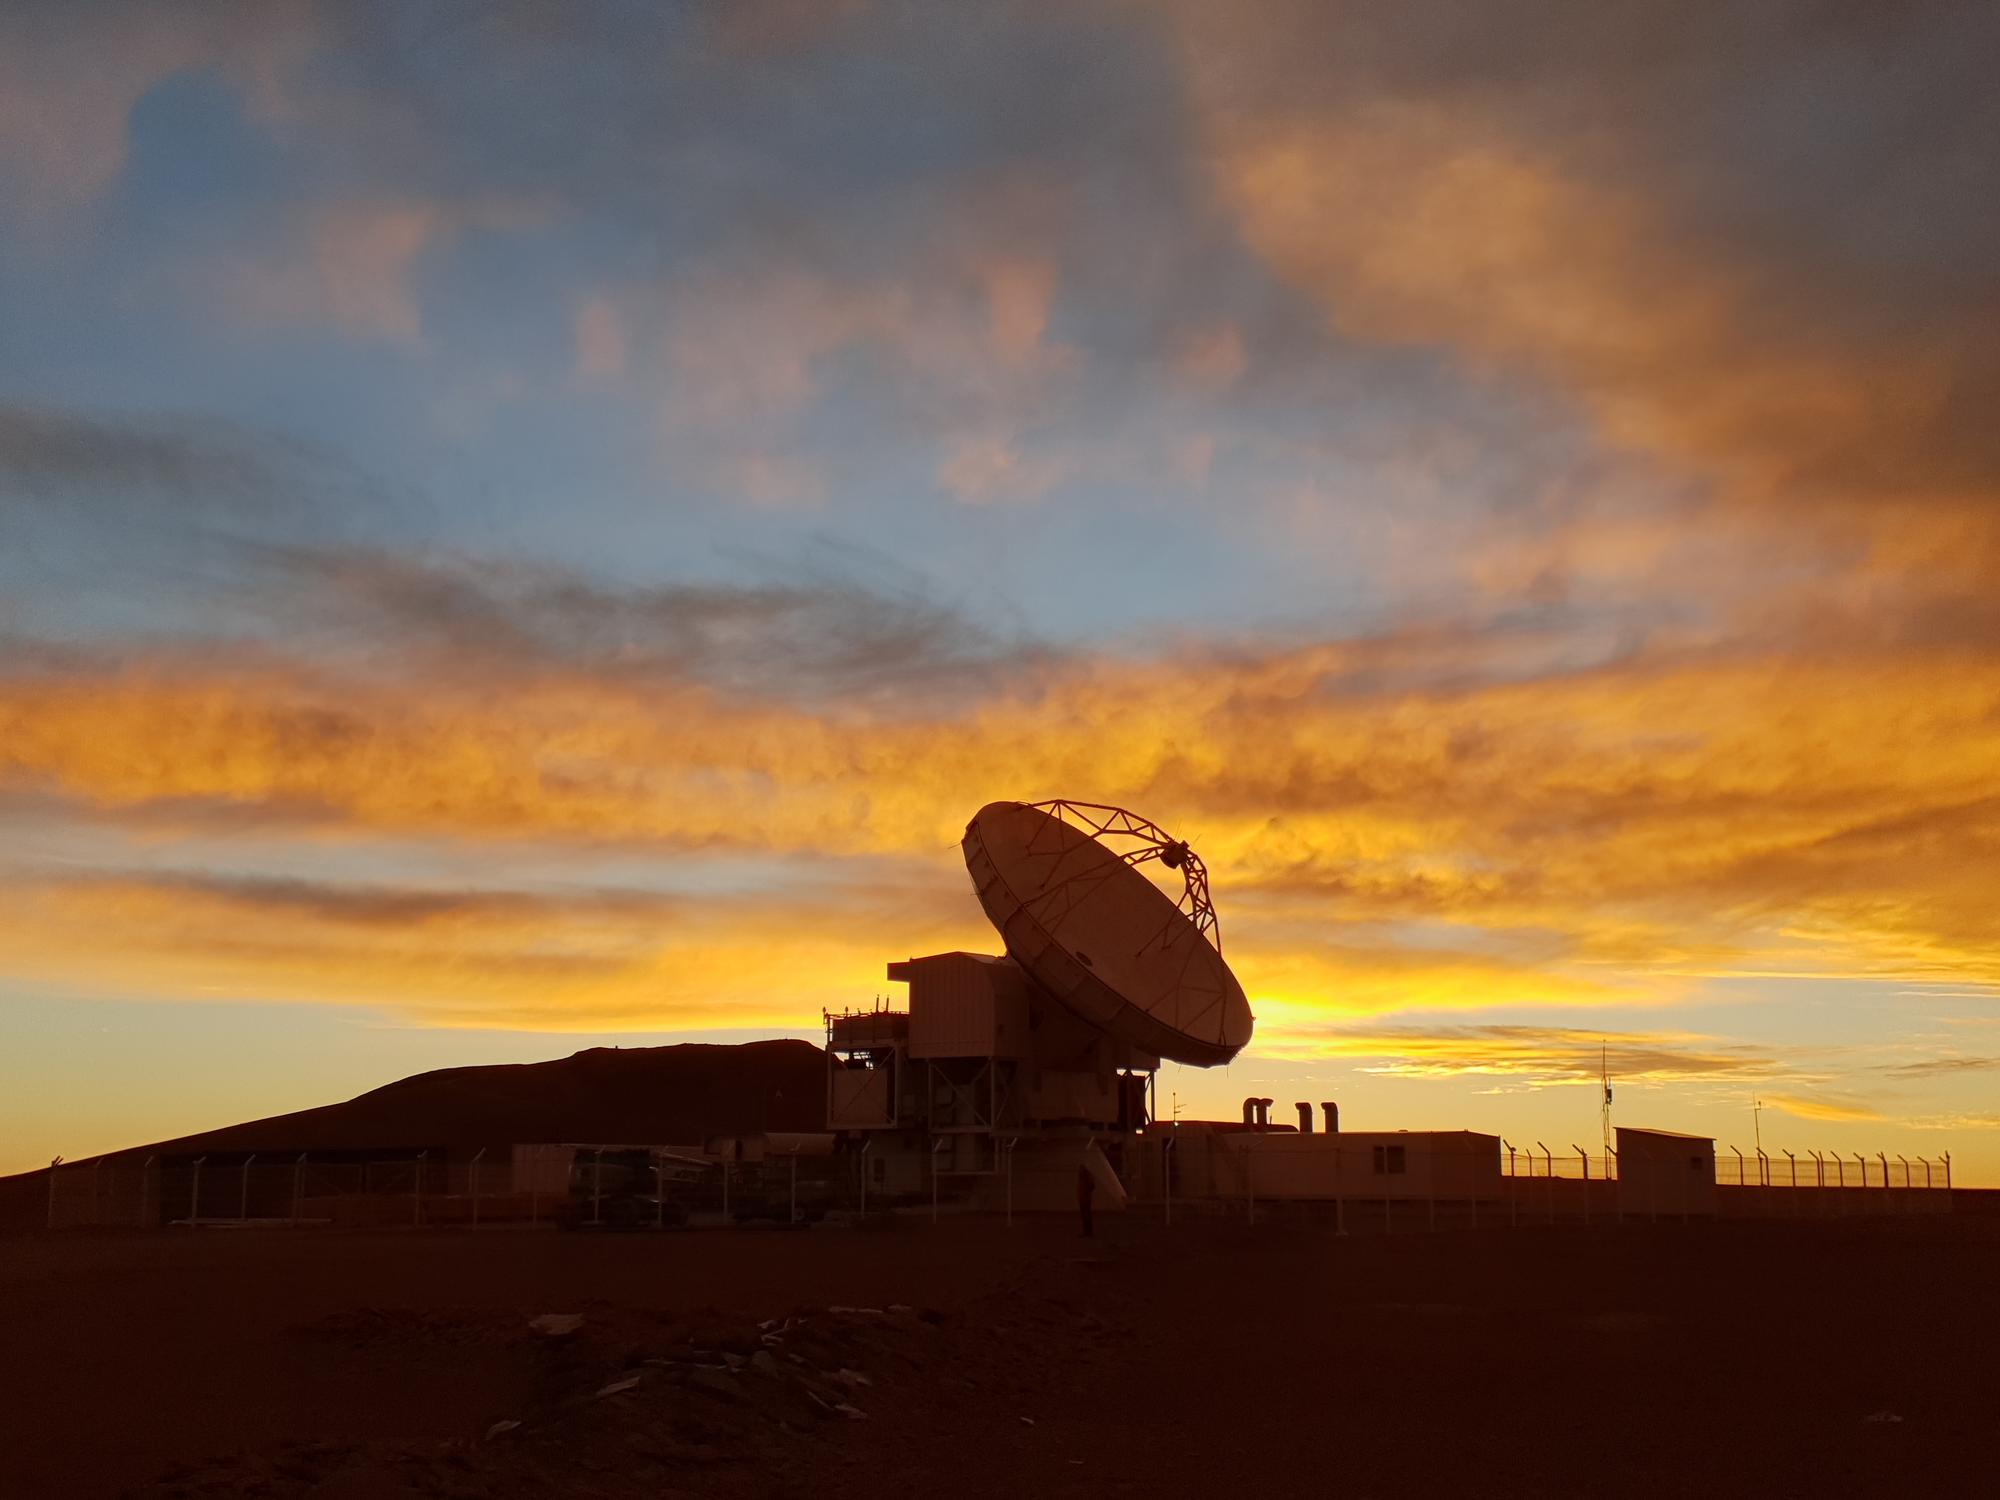 The APEX telescope at sunset during the EHT 2018 observing campaign